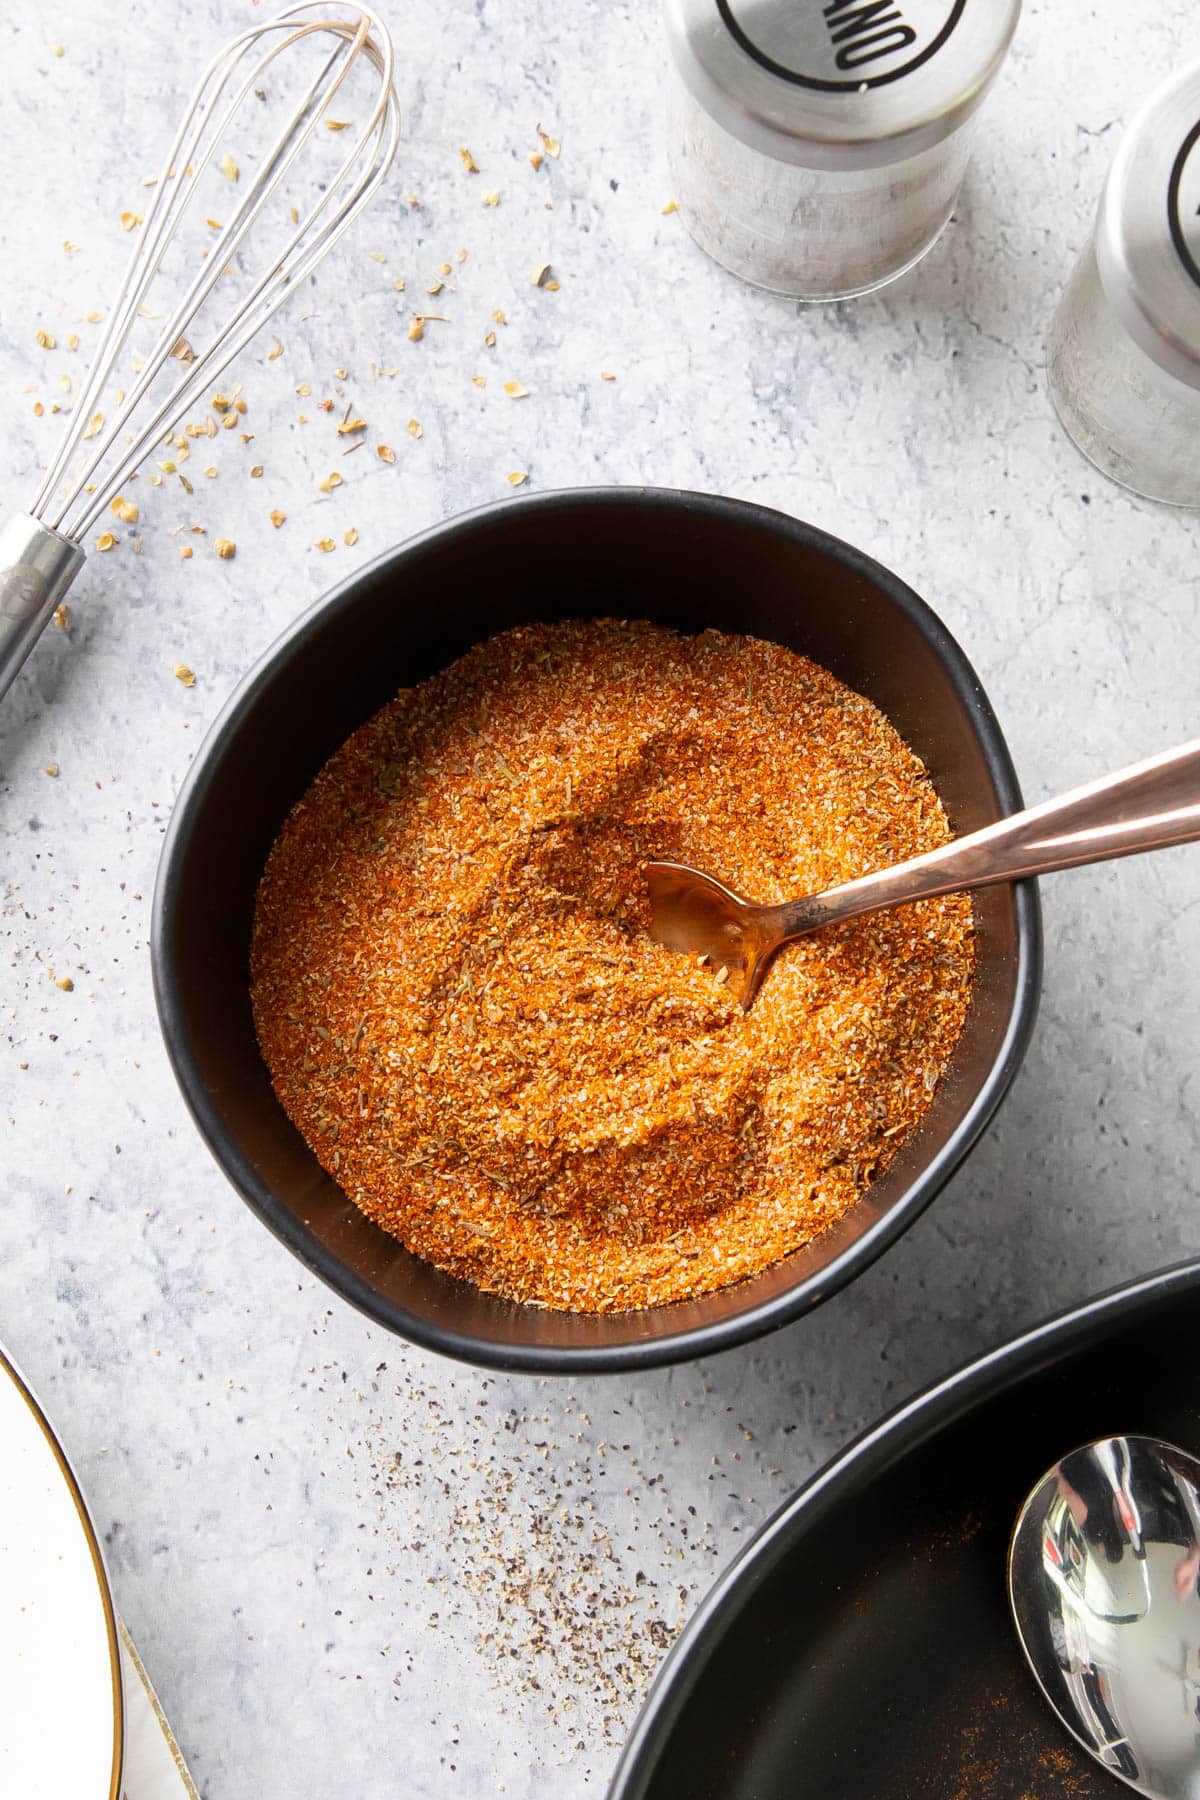 This spicy, flavorful Cajun Seasoning originating from Louisiana served in a bowl with a spoon.